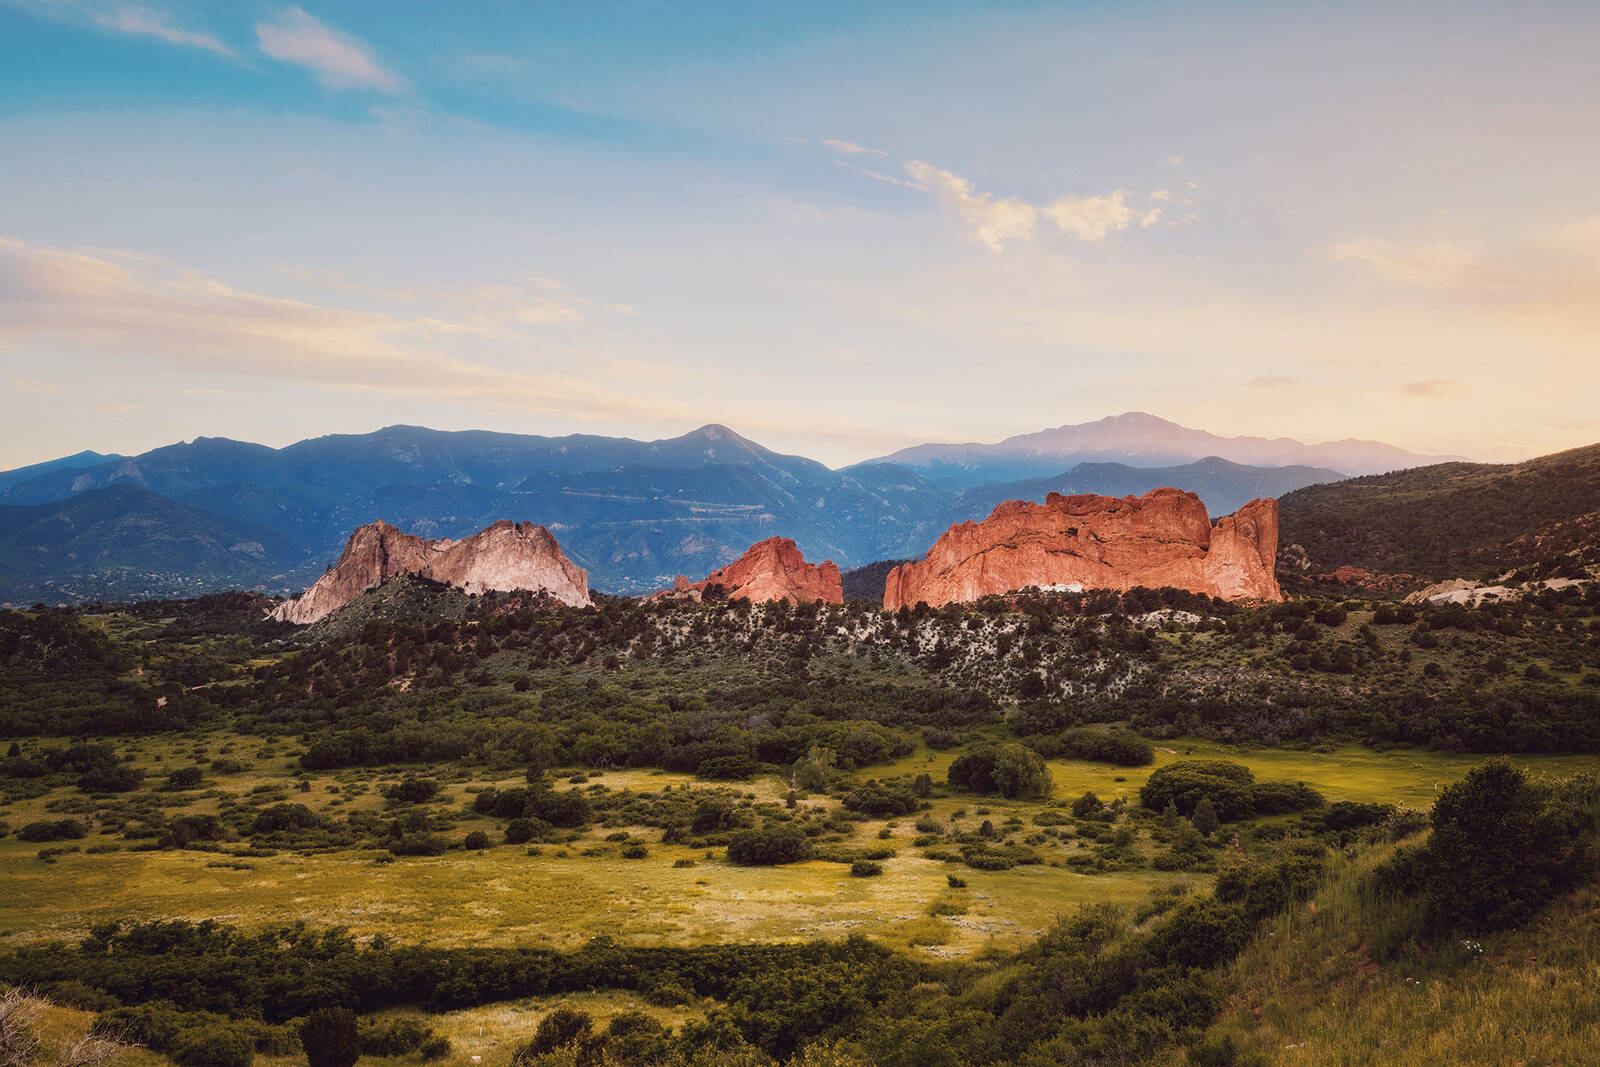 Image of Garden of the Gods by Ryan Smith